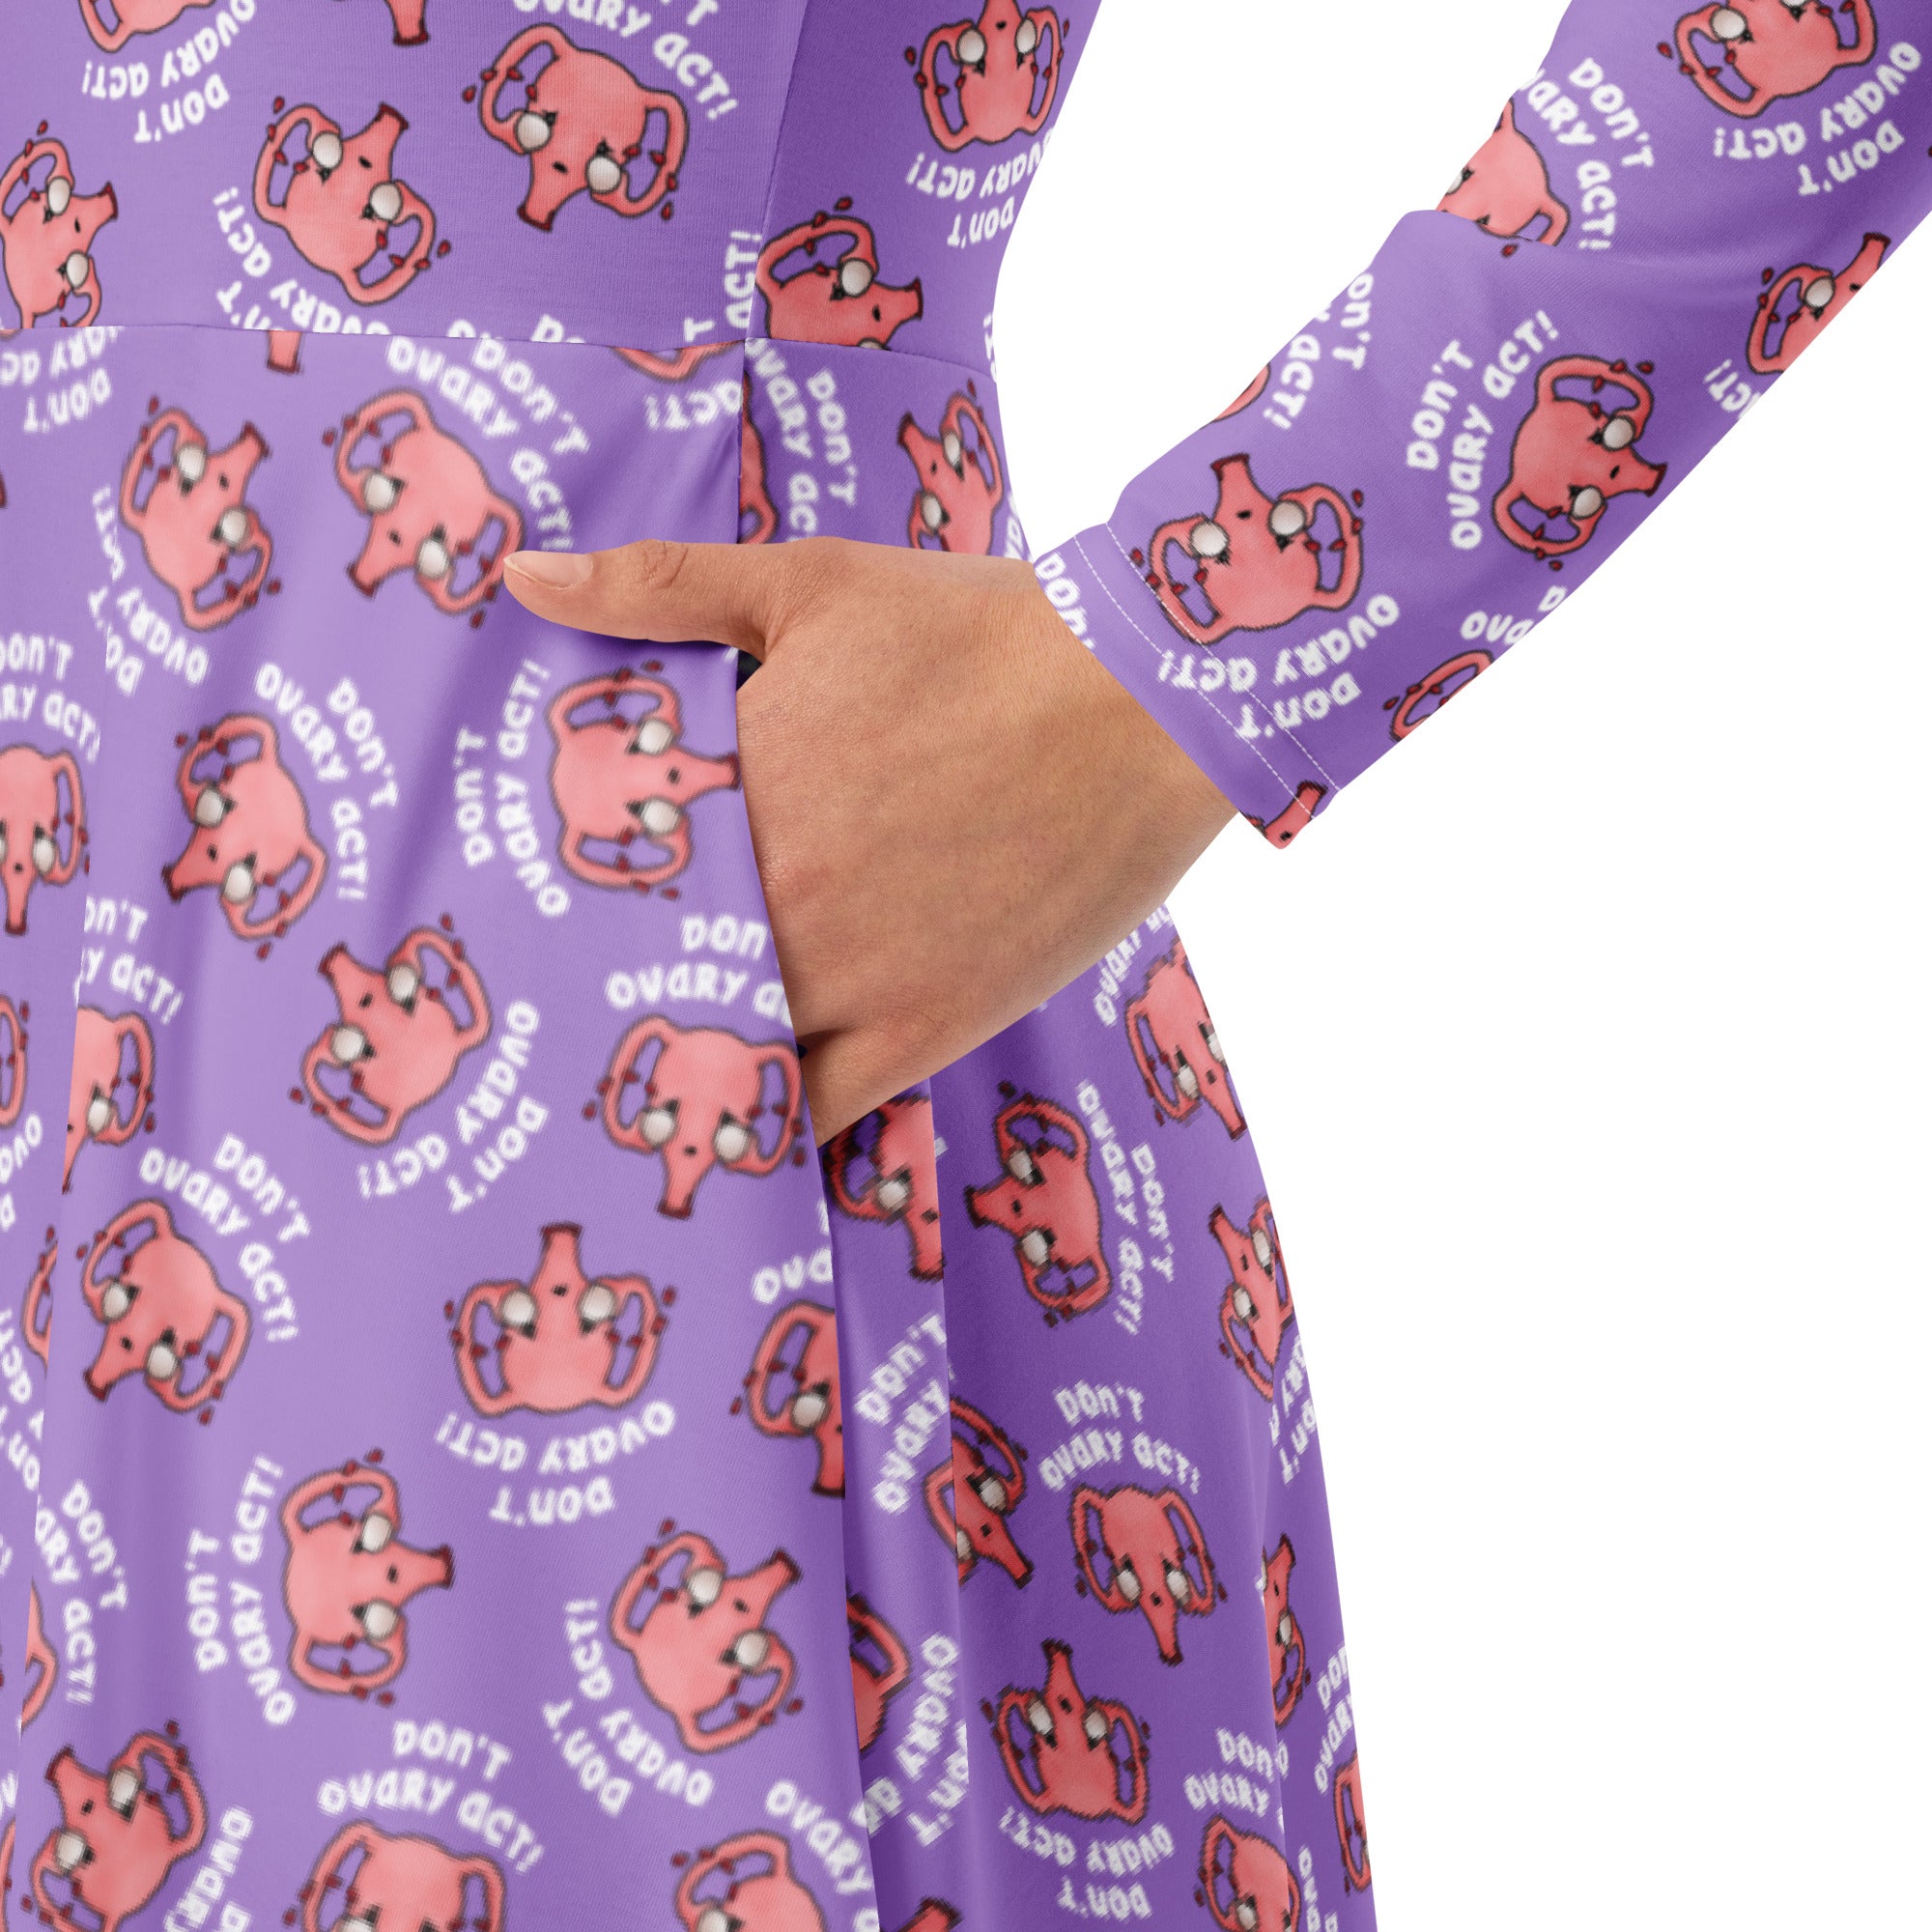 Close up of Don't Ovary Act dress in purple showing pockets